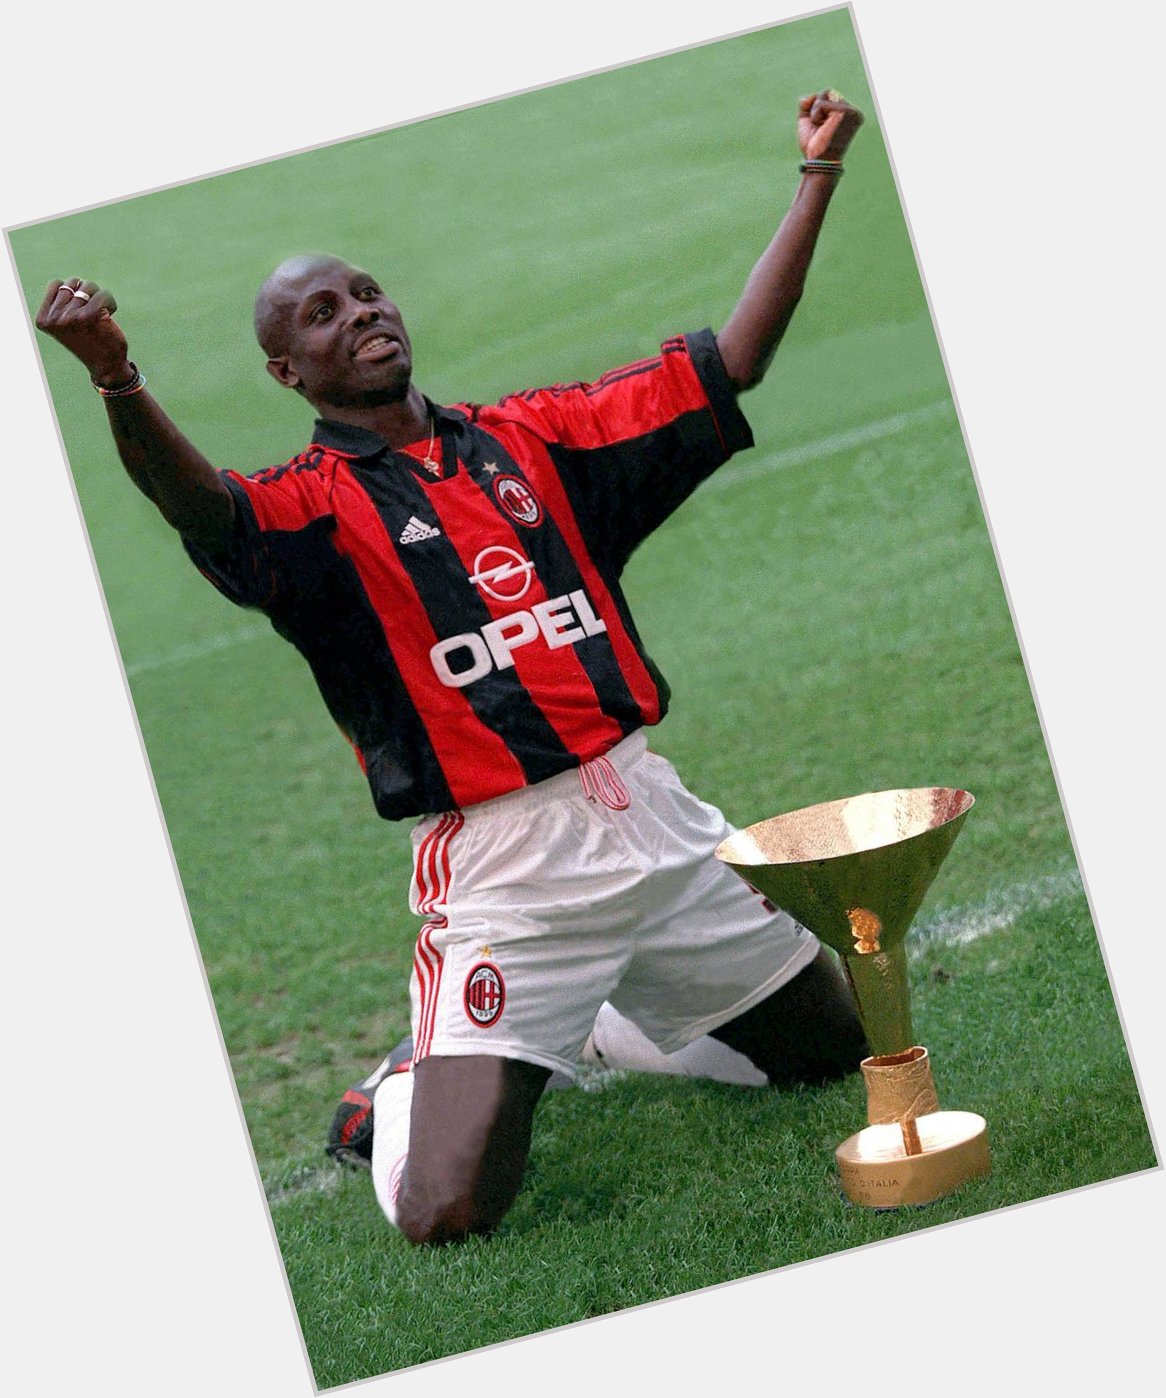 Happy Birthday to George Weah! What a career he had  443 games  176 goals  17 assists 